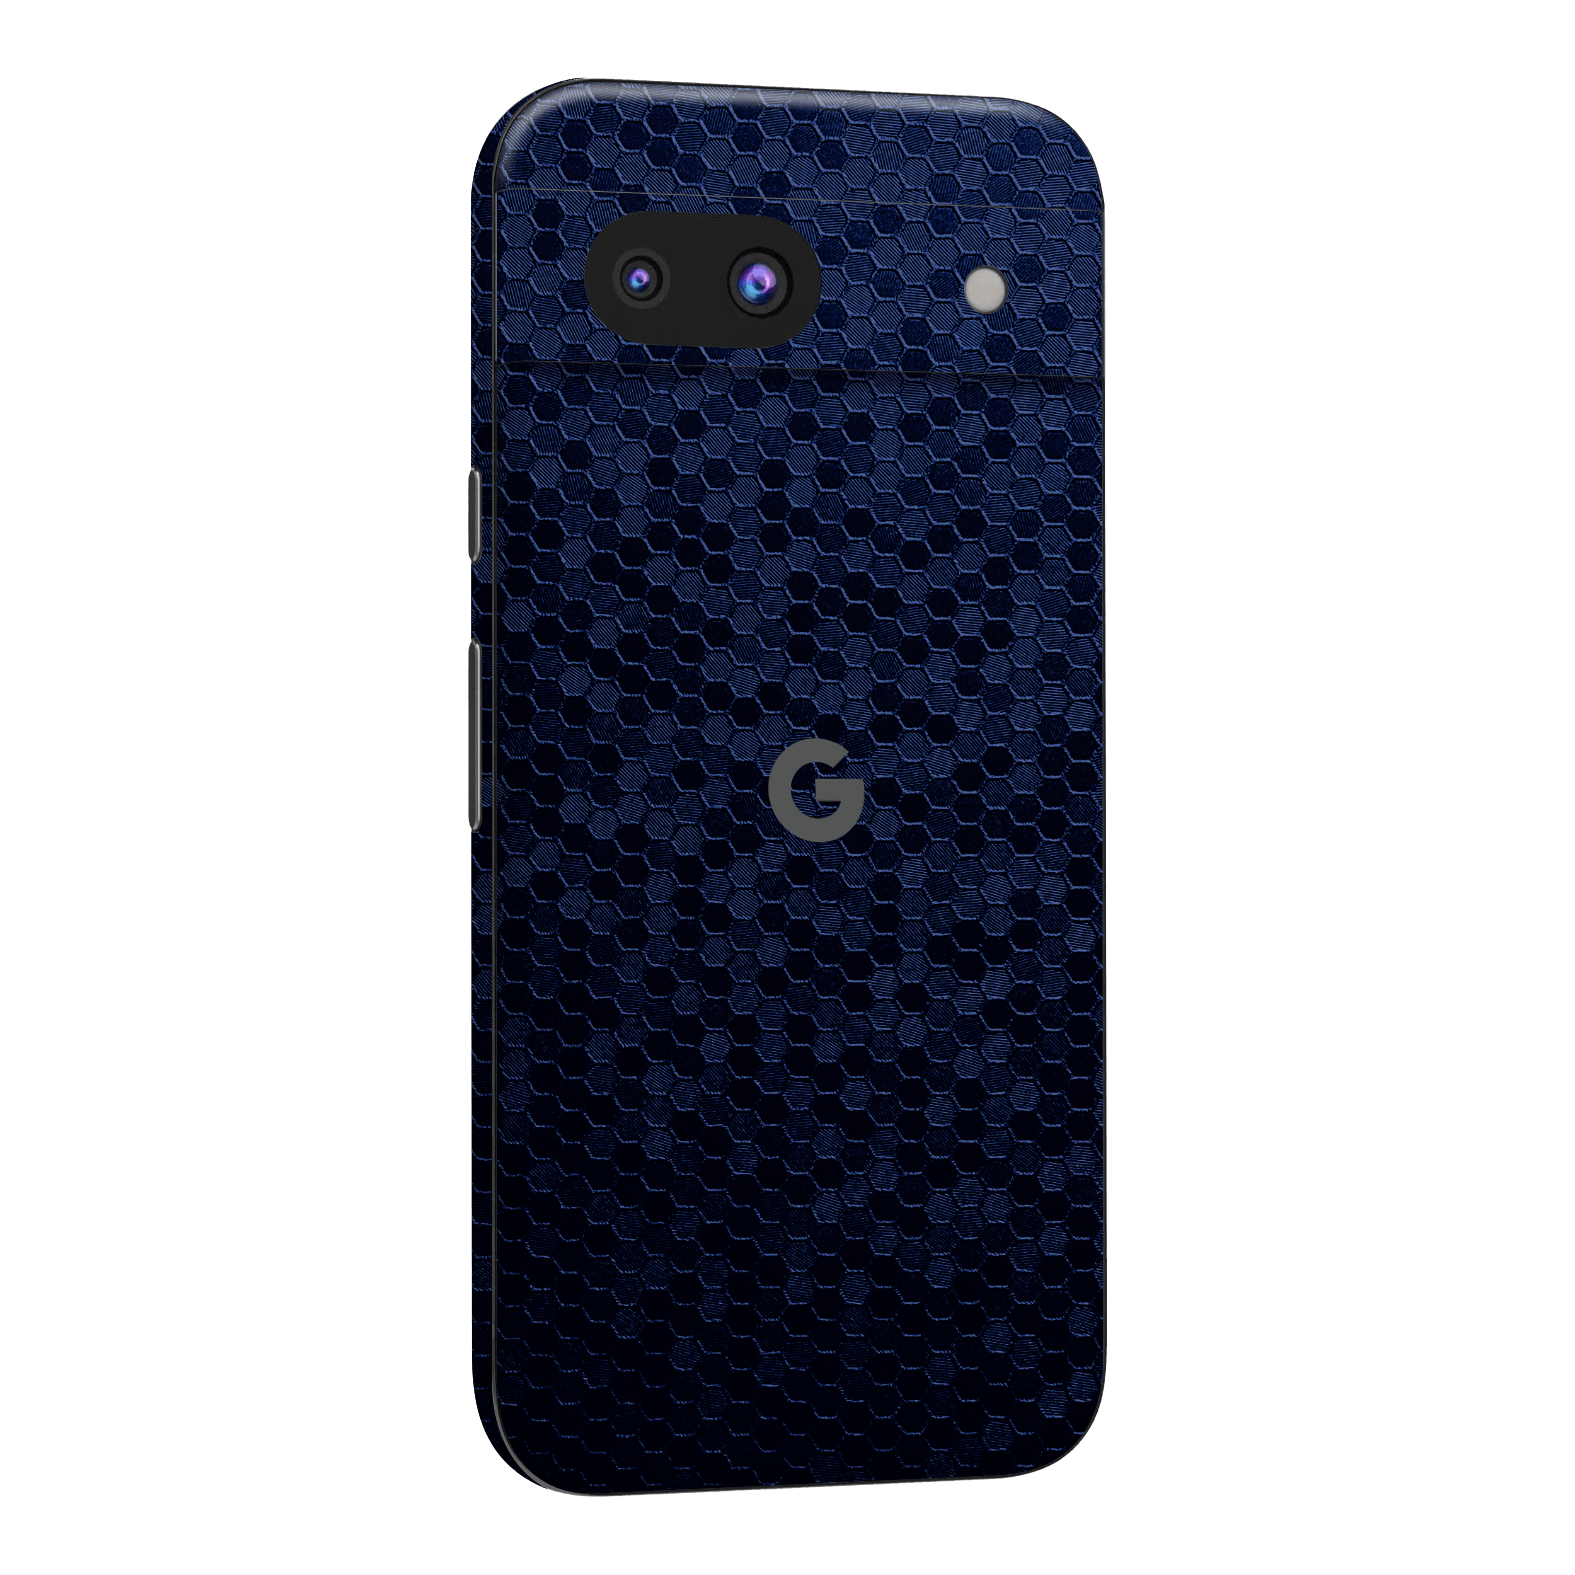 Google Pixel 8a Luxuria Navy Blue Honeycomb 3D Textured Skin Wrap Sticker Decal Cover Protector by QSKINZ | qskinz.com